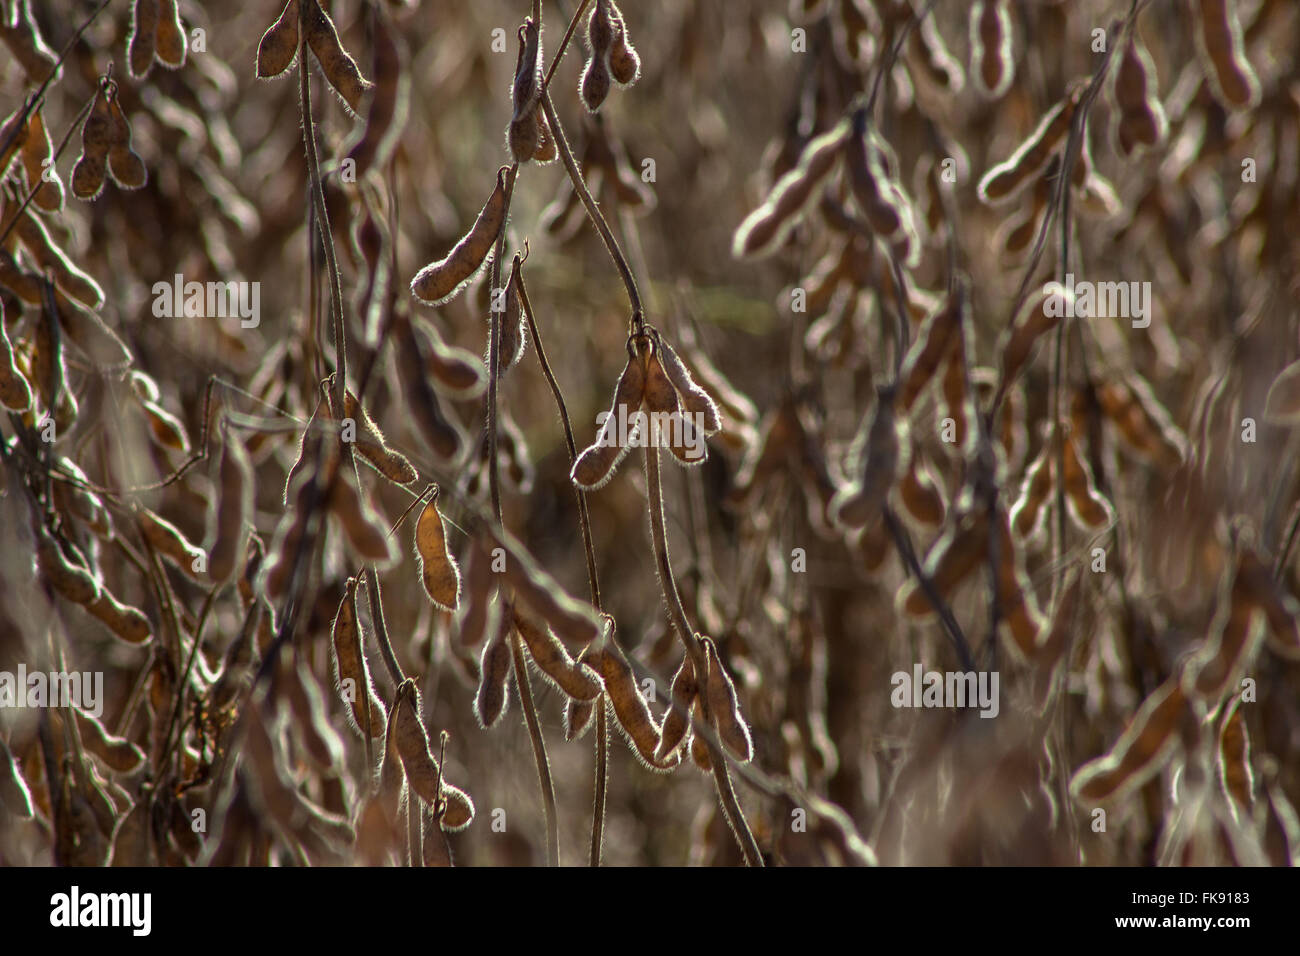 Detail of planting soybeans ready for harvest Stock Photo